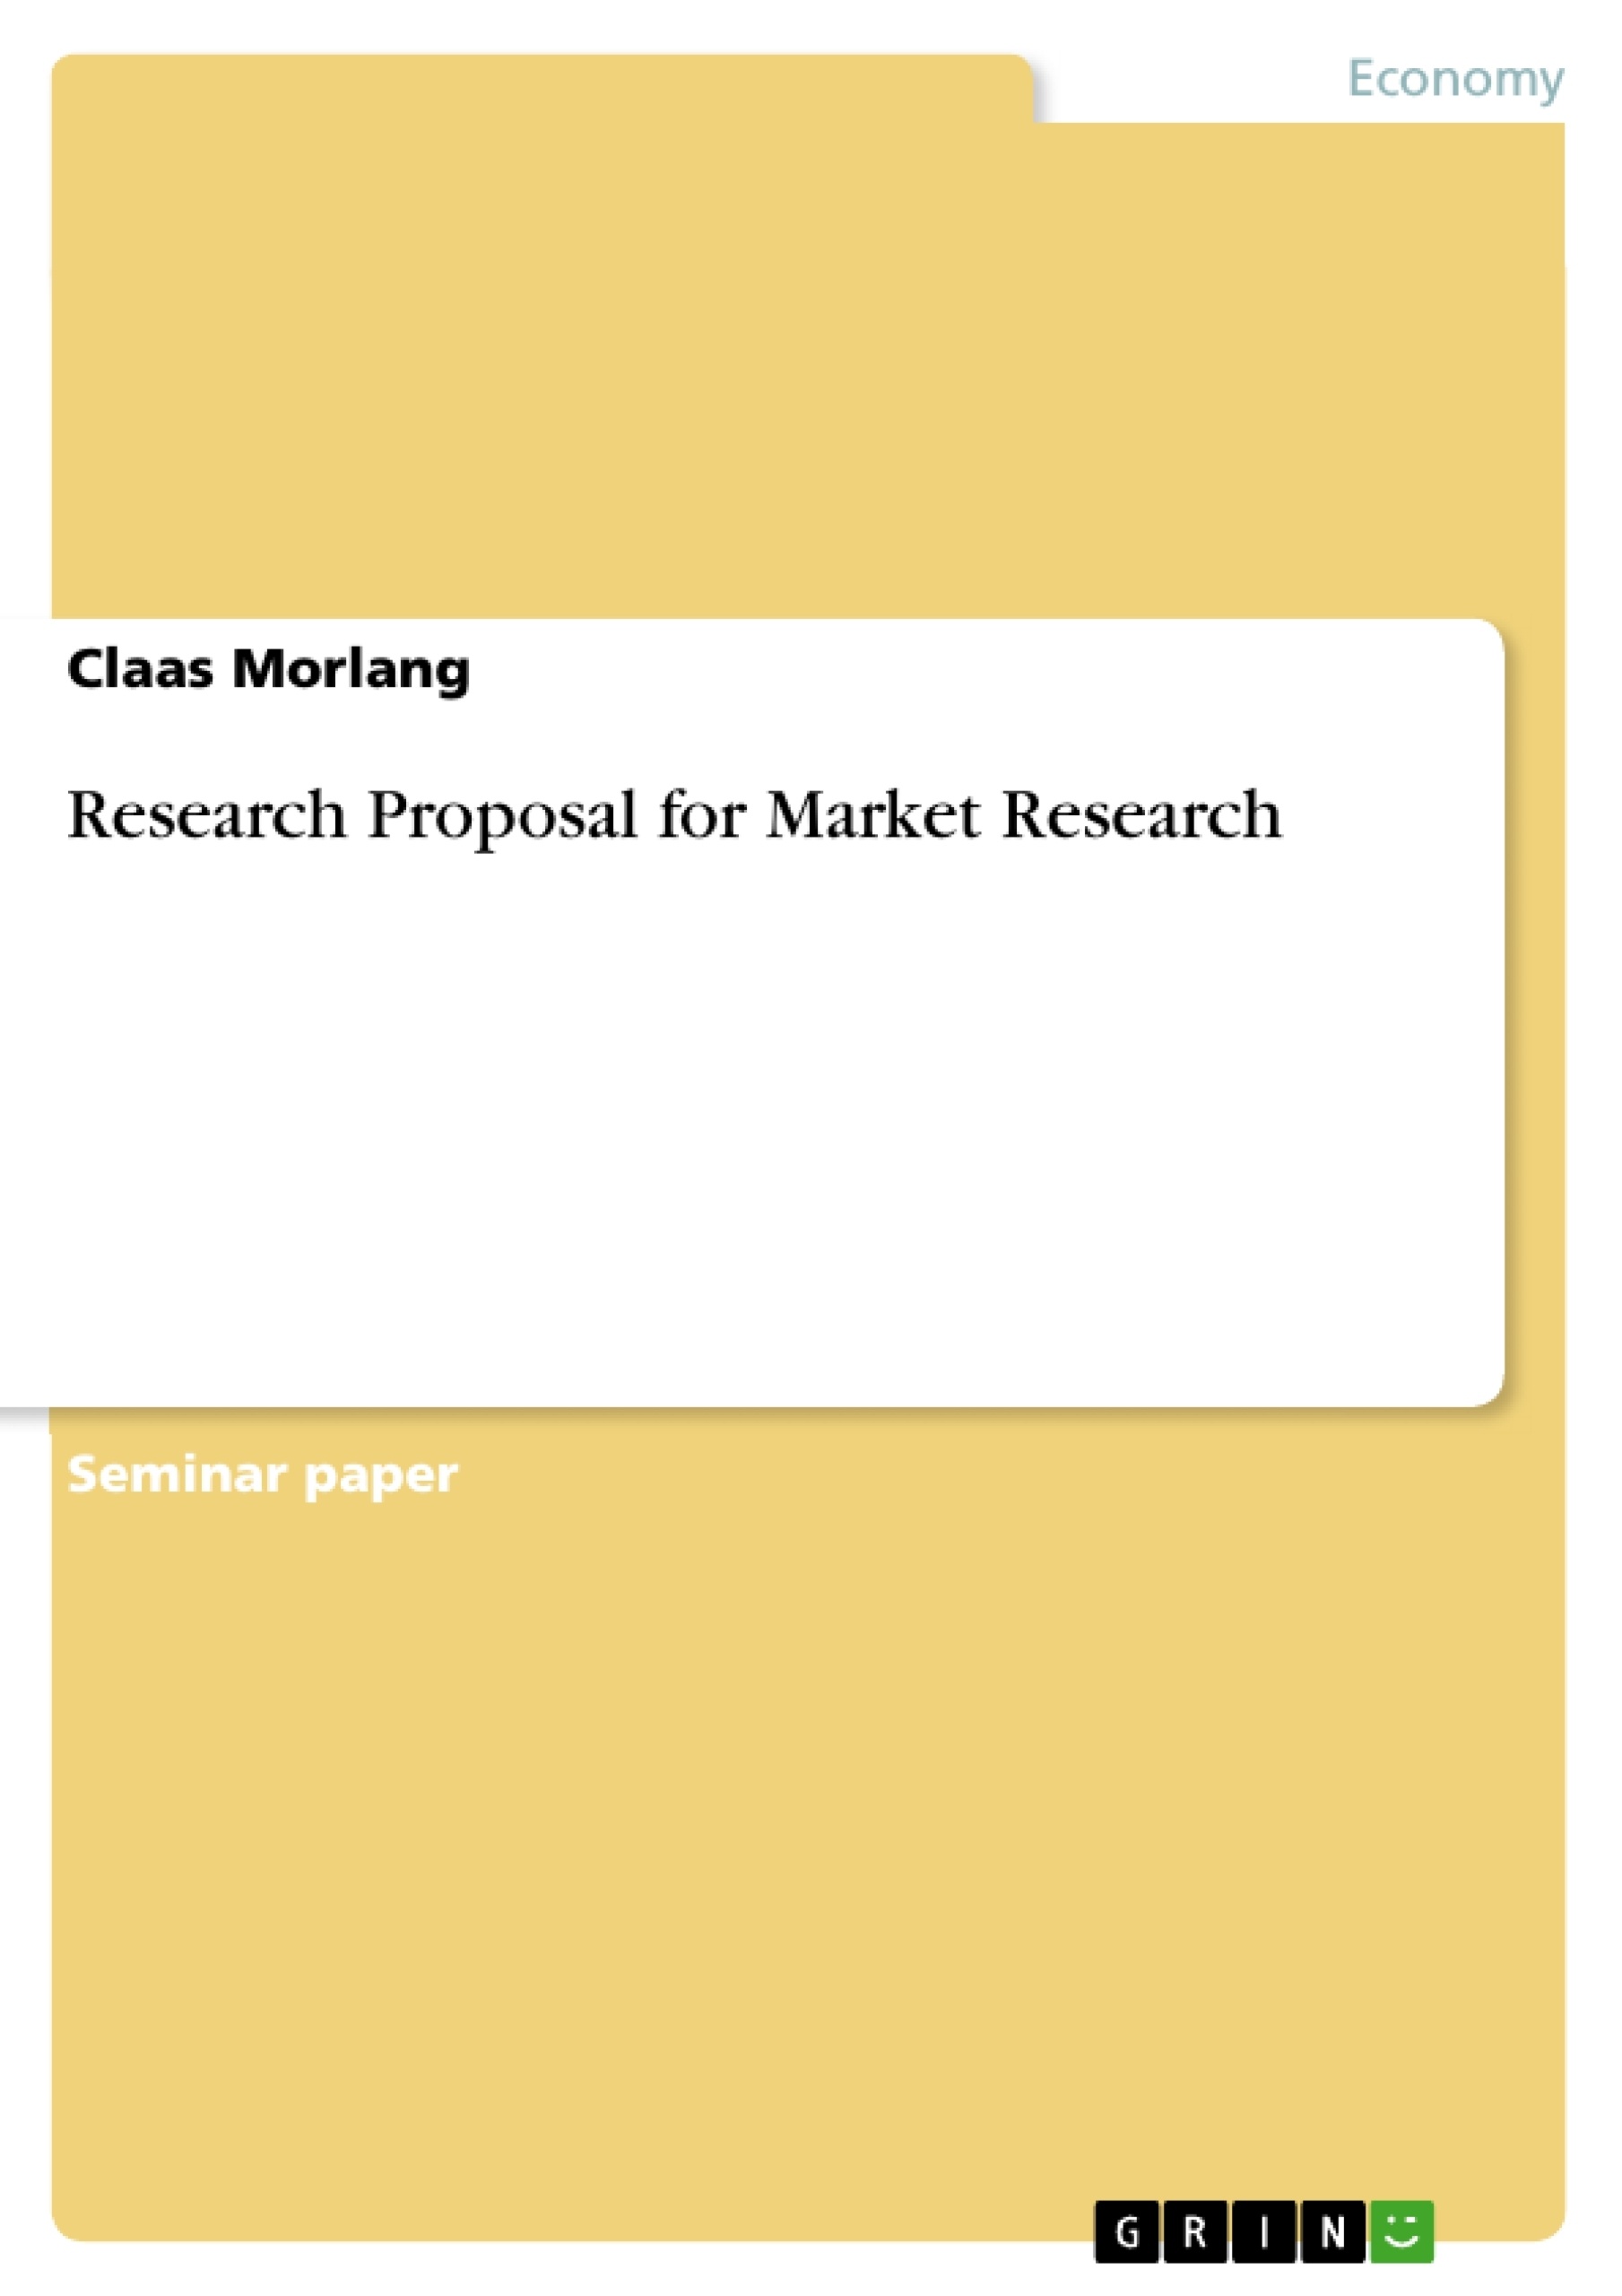 Title: Research Proposal for Market Research